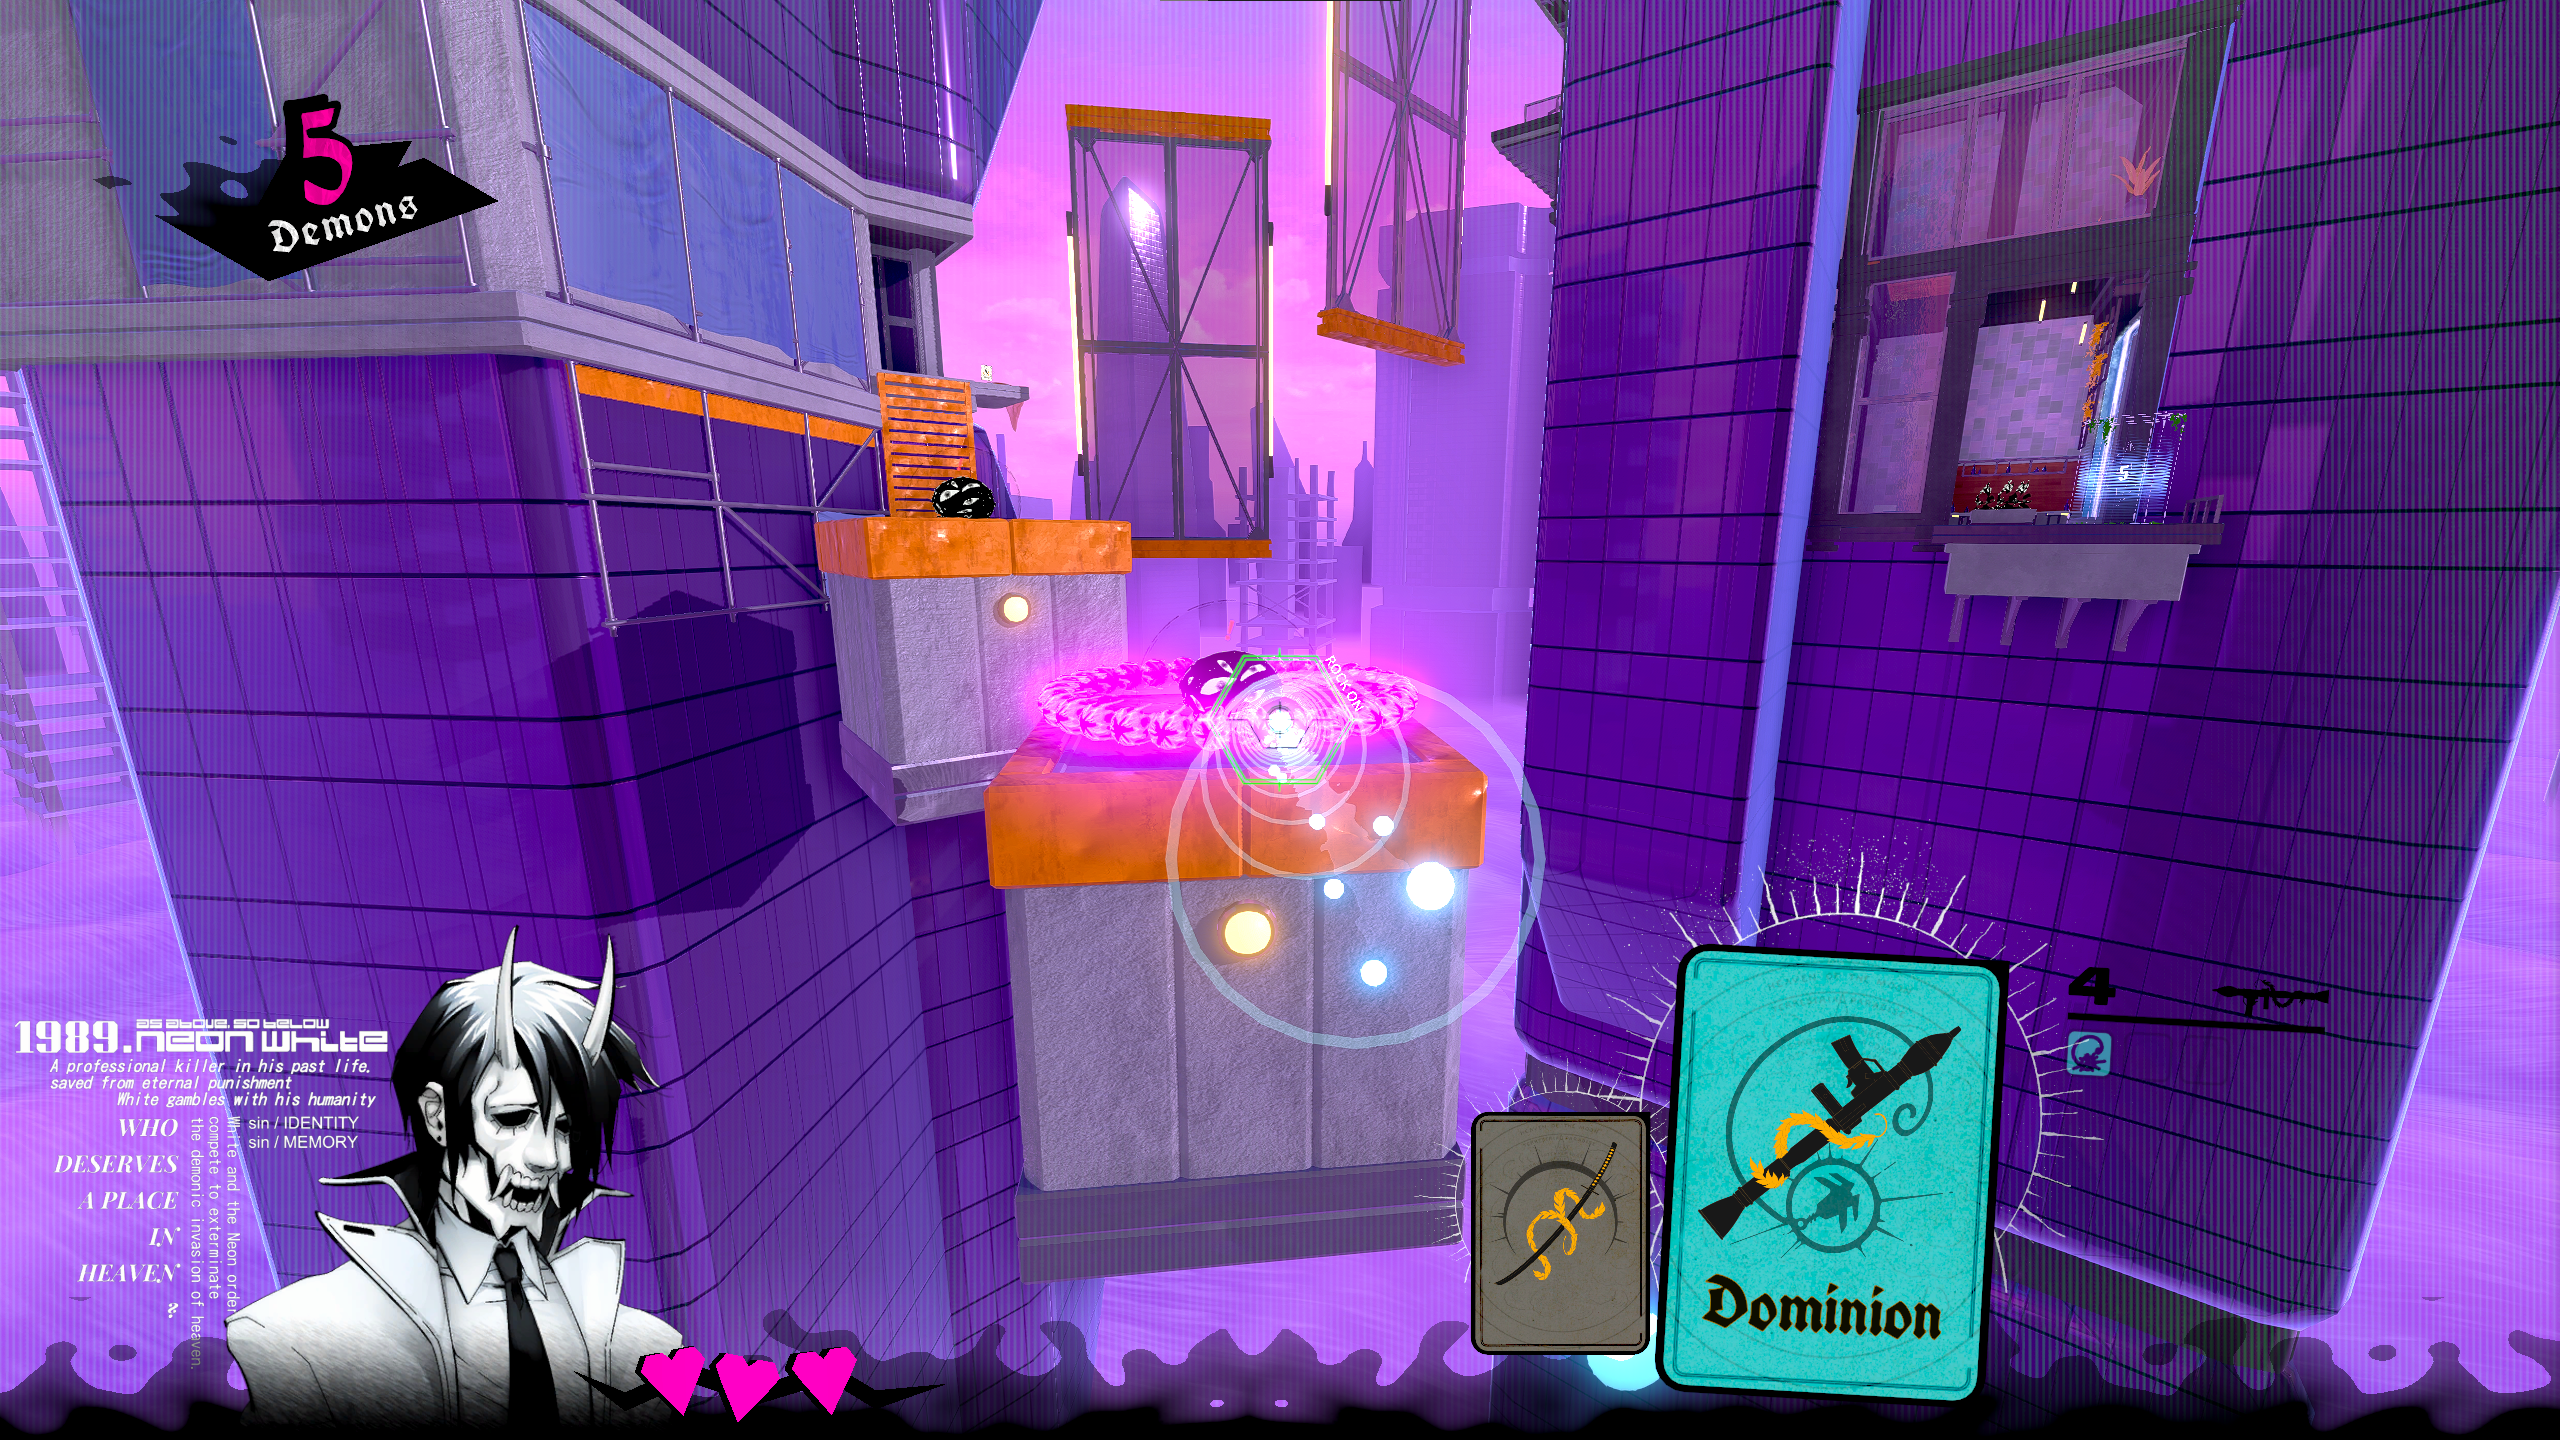 A player shoots a rocket at an enemy in Neon White.